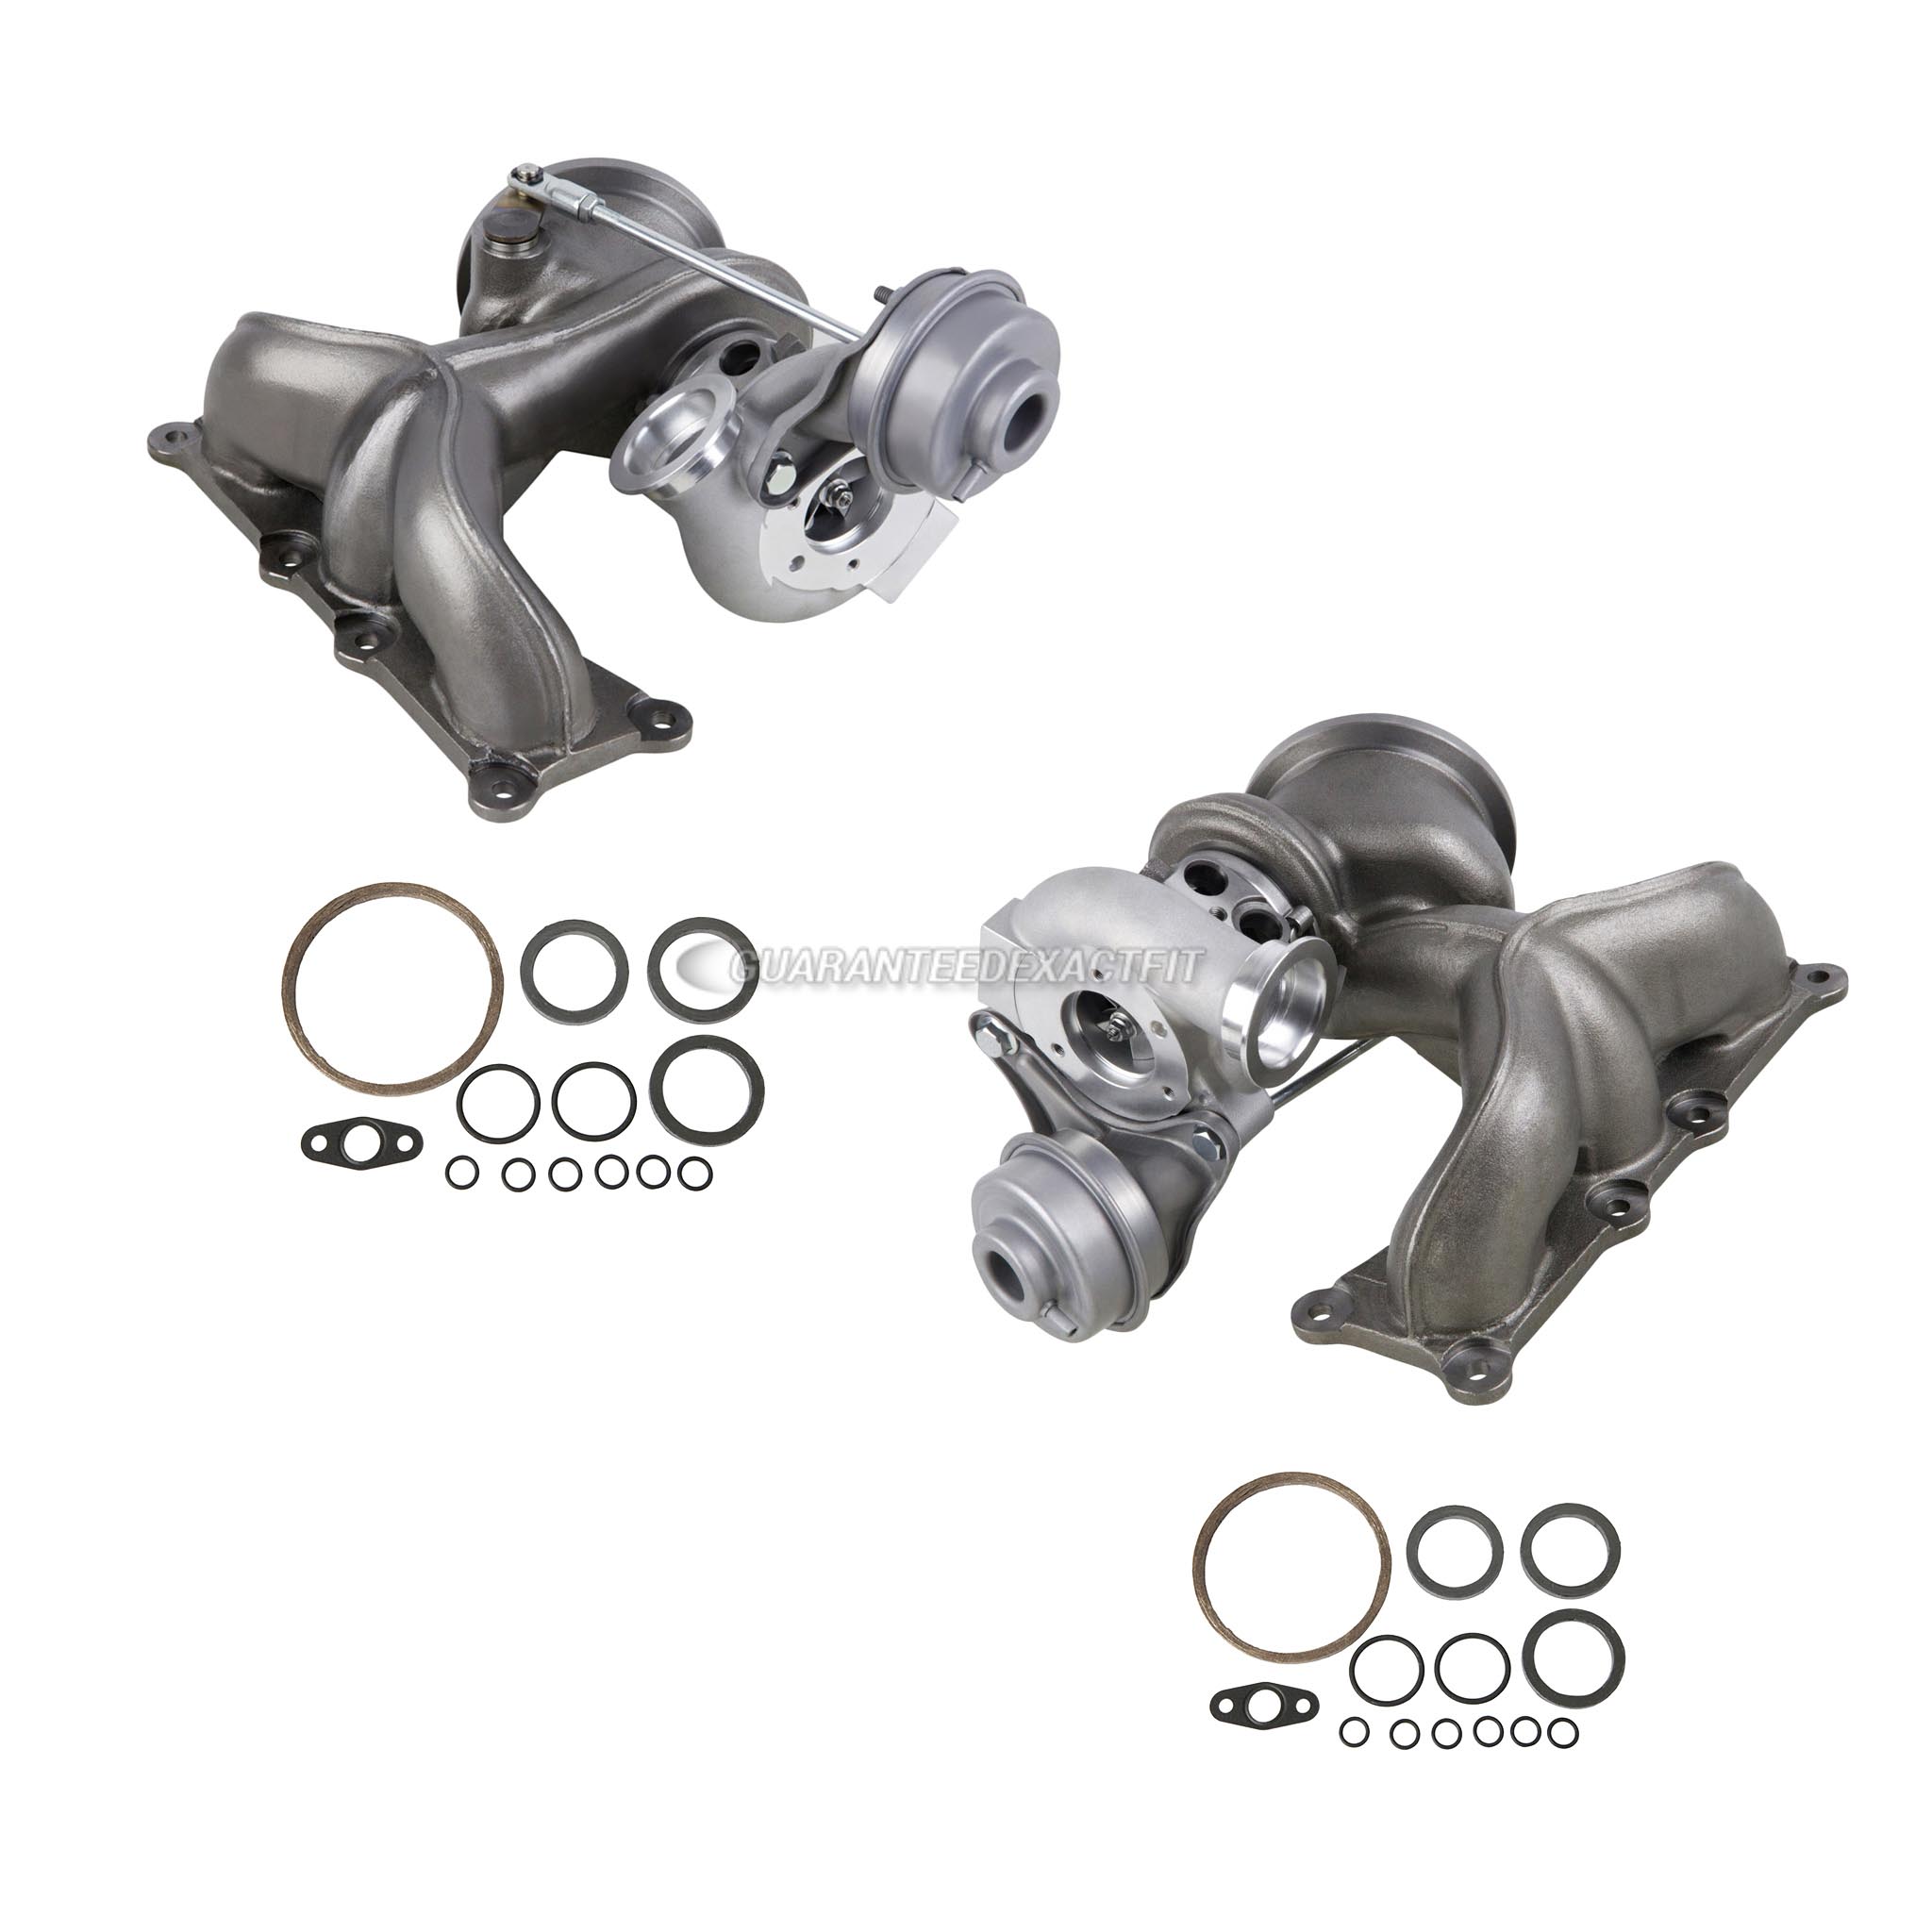 2011 Bmw 740 Turbocharger and Installation Accessory Kit 